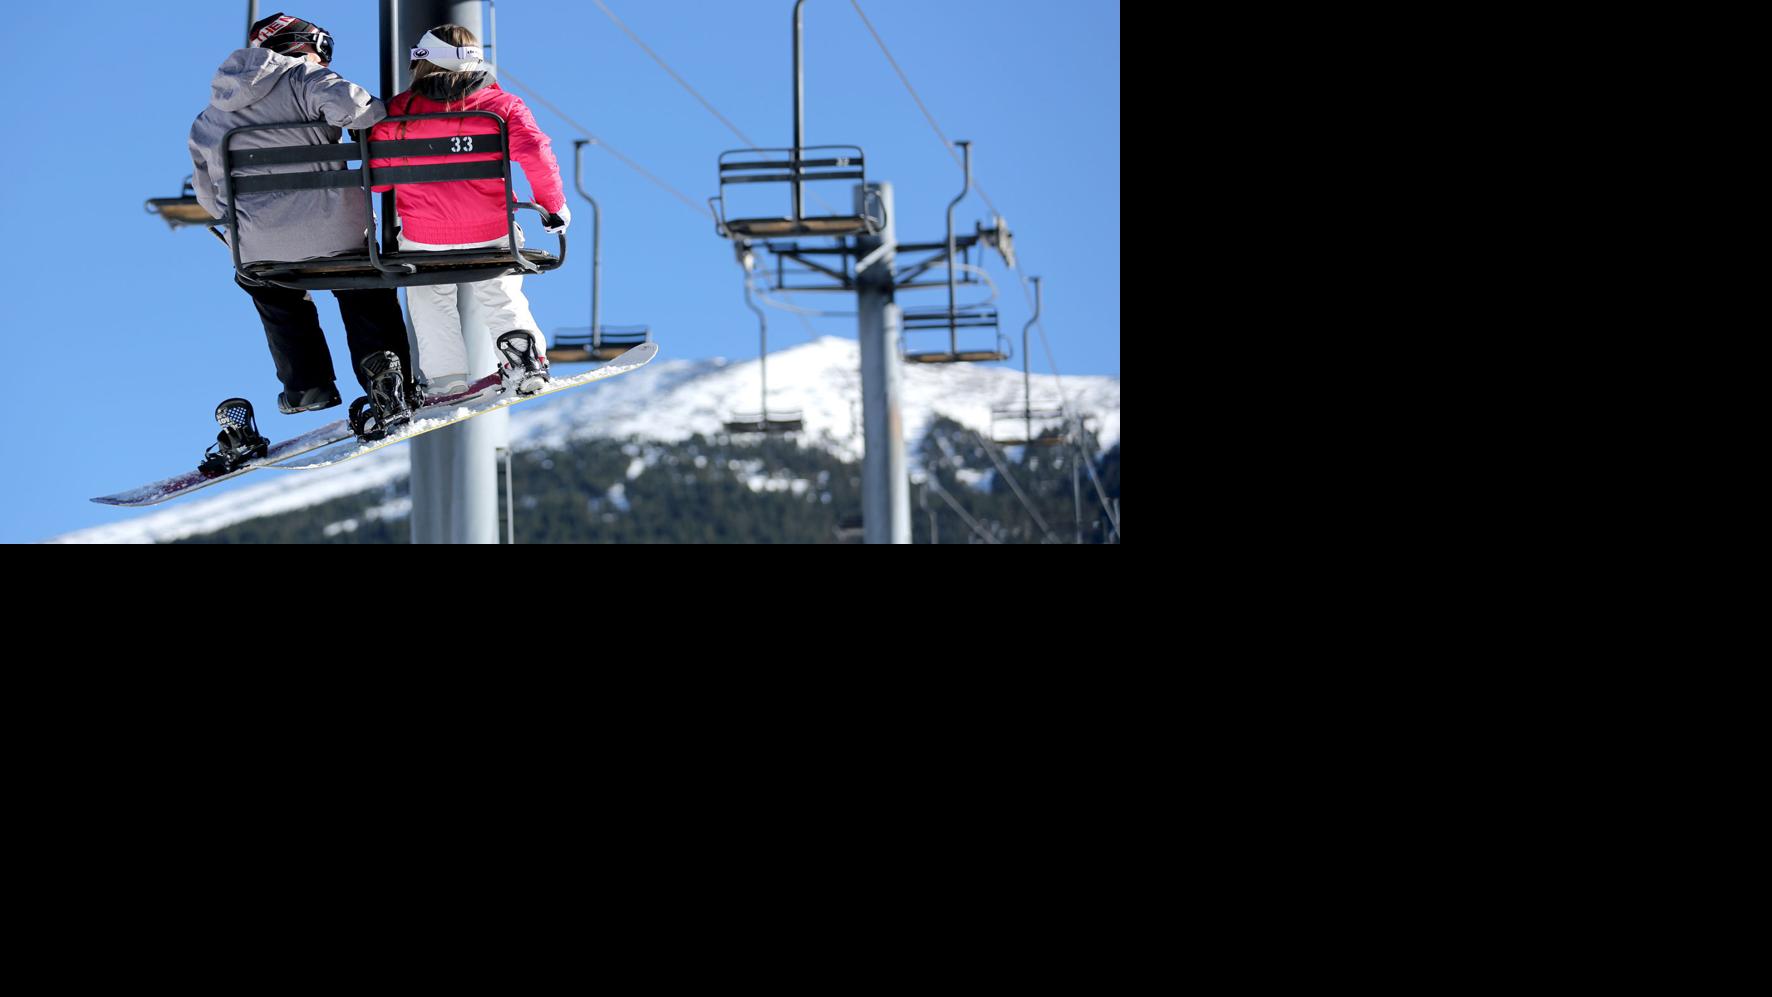 Striking photos of ice-encased chairlift at Big White warm hearts